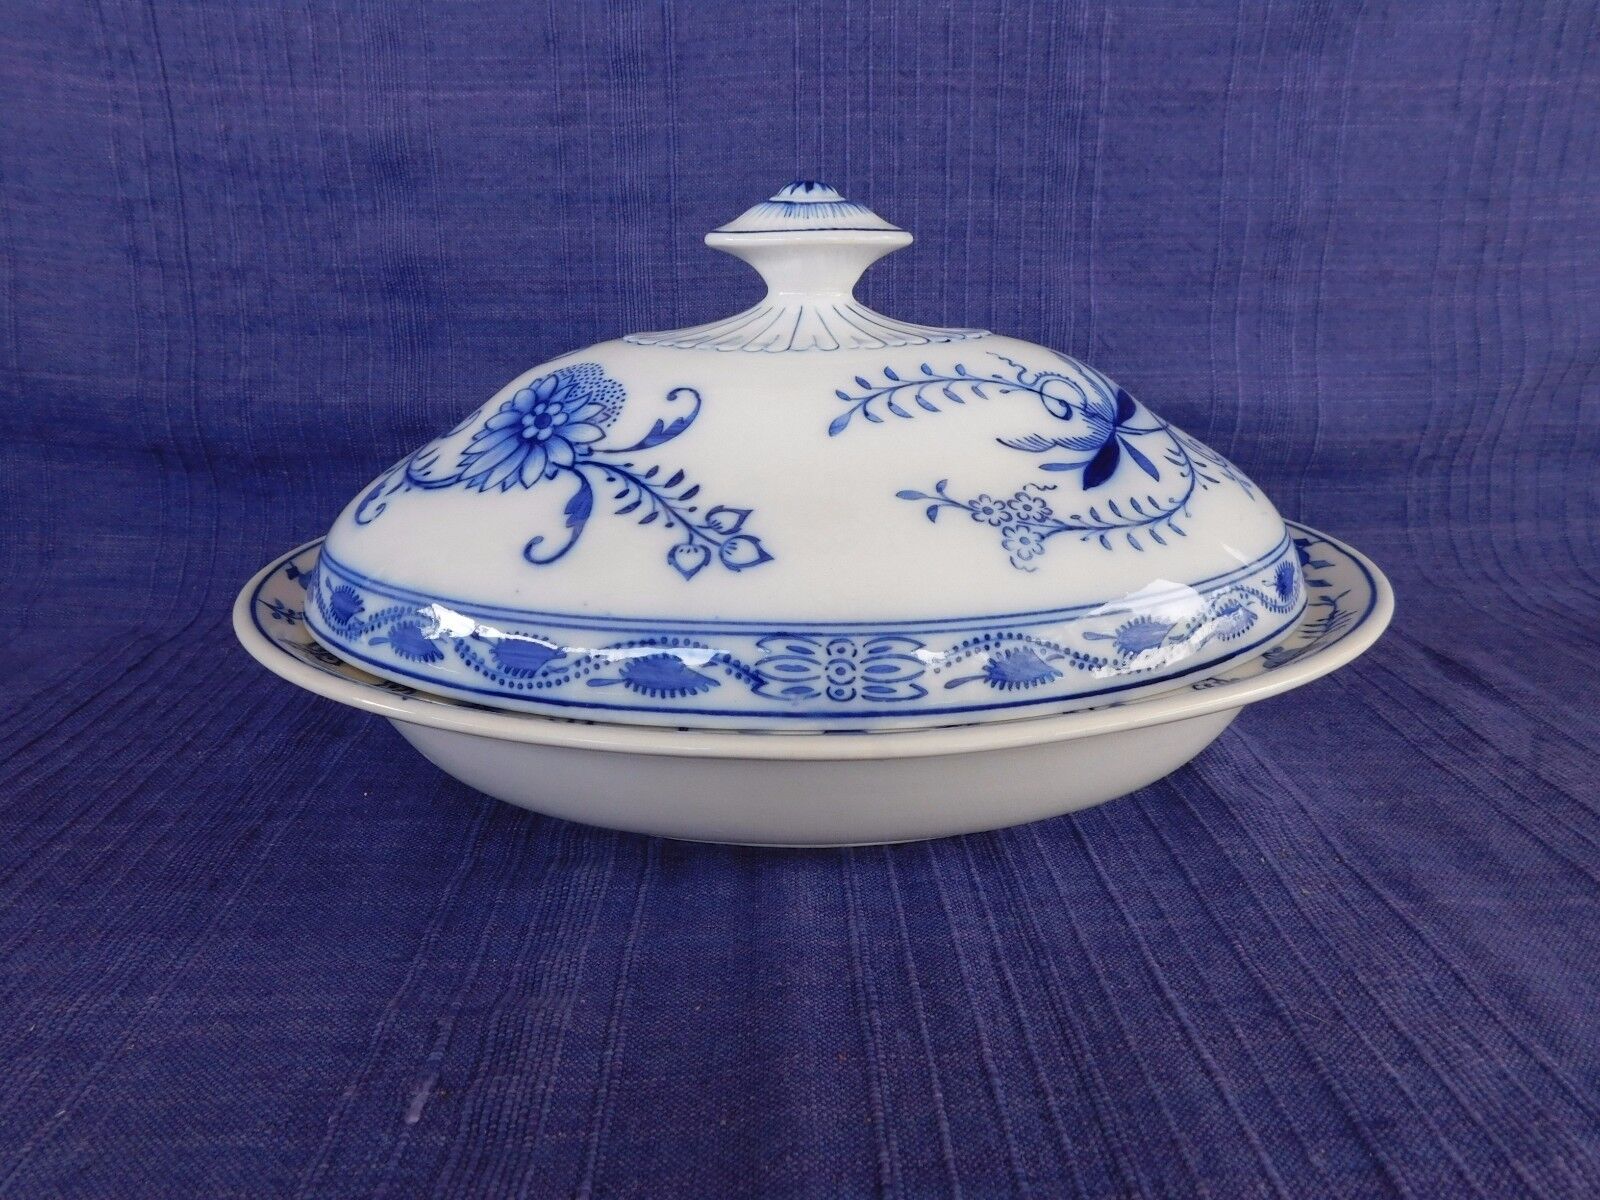 Antique Villeroy & Boch COVERED DIVIDED SERVING BOWL ca 1874-1920s BLUE ONION Darmowa dostawa